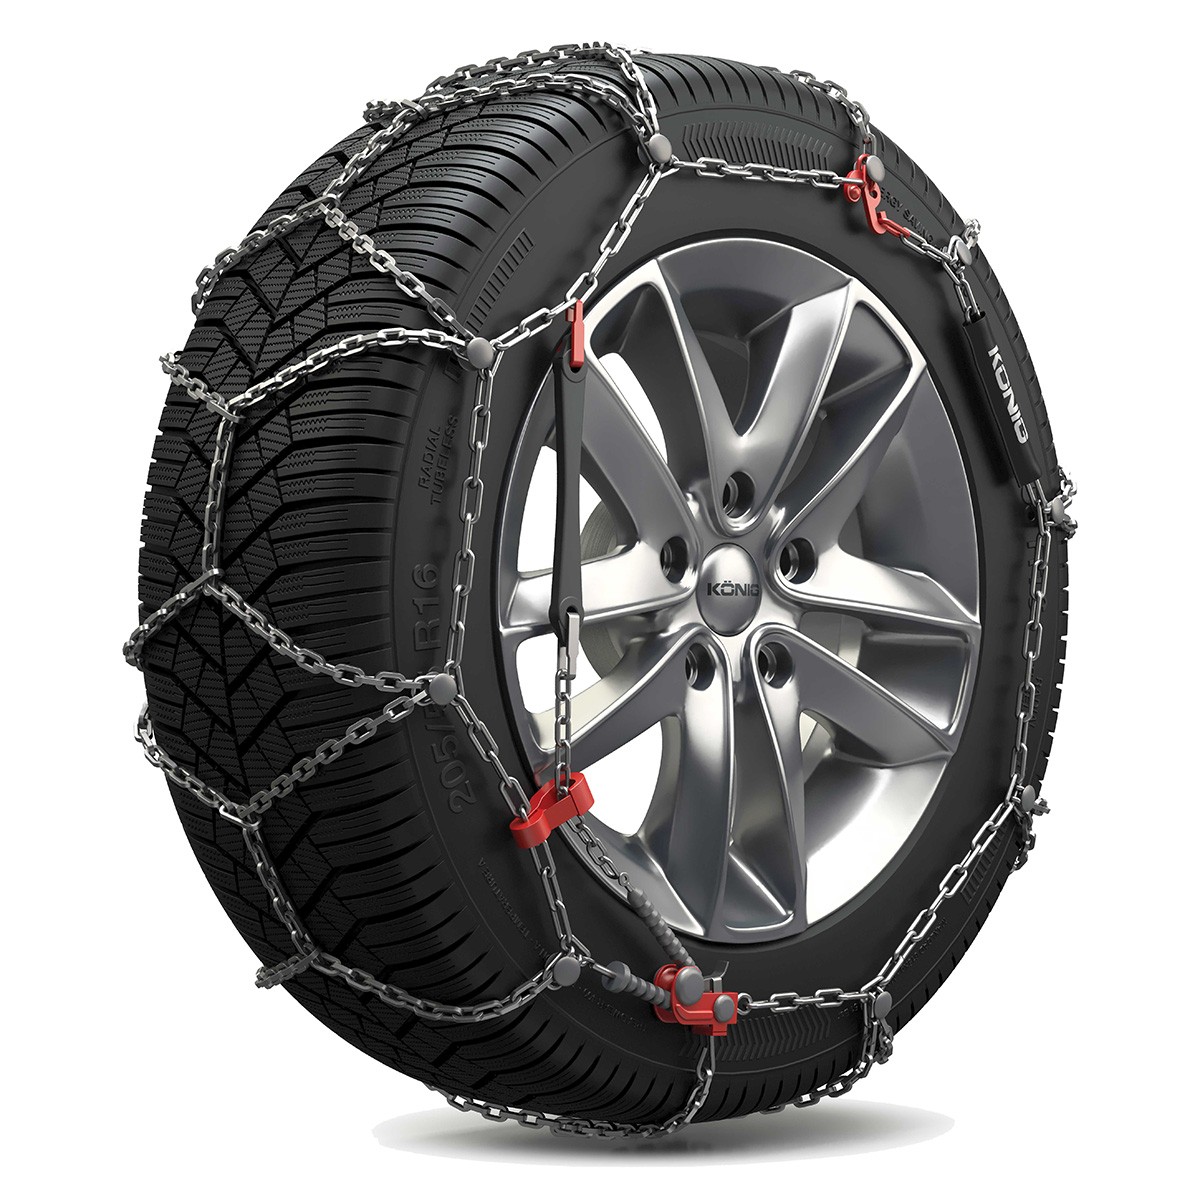 Snow chains 215/65 R16 : discount price, free delivery 